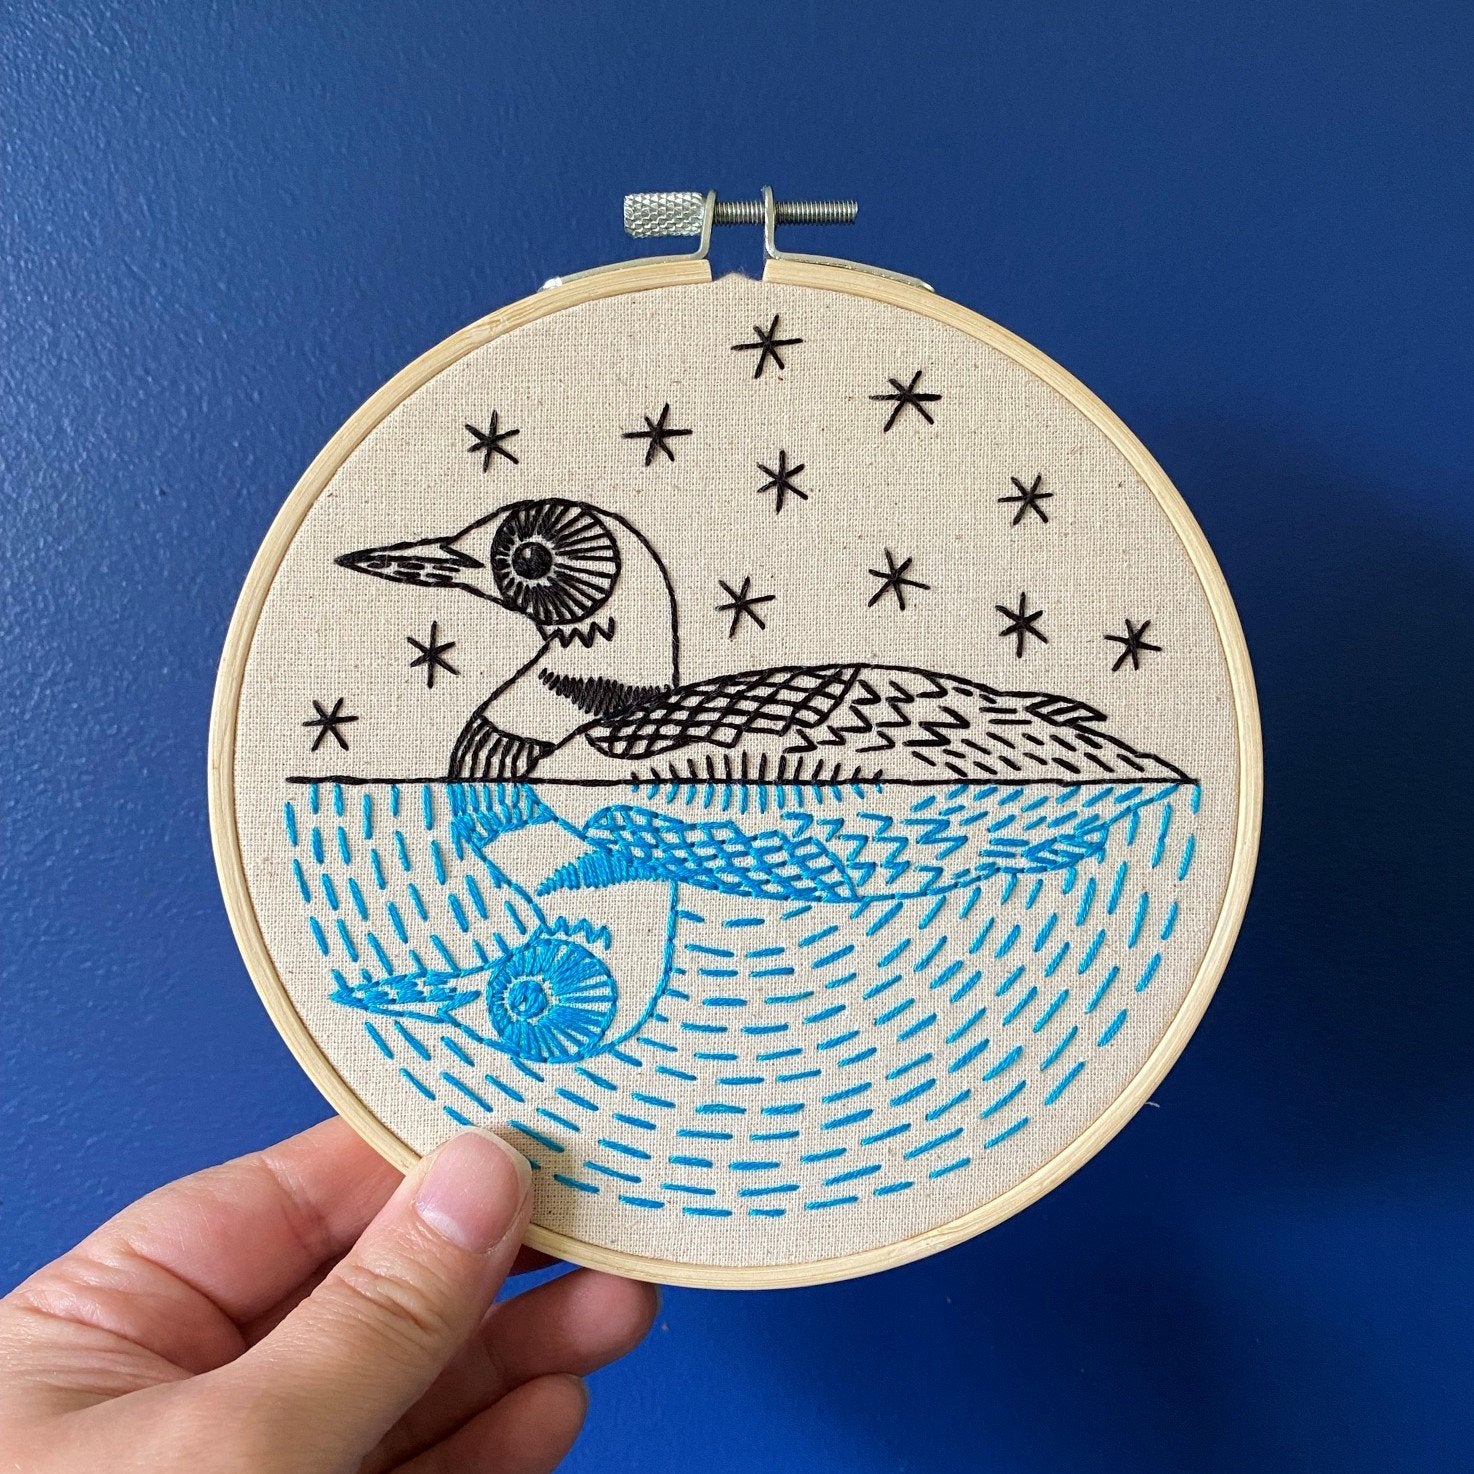 A completed stamped embroidery kit Nevermore by Hook, Line and Tinker : r/ Embroidery